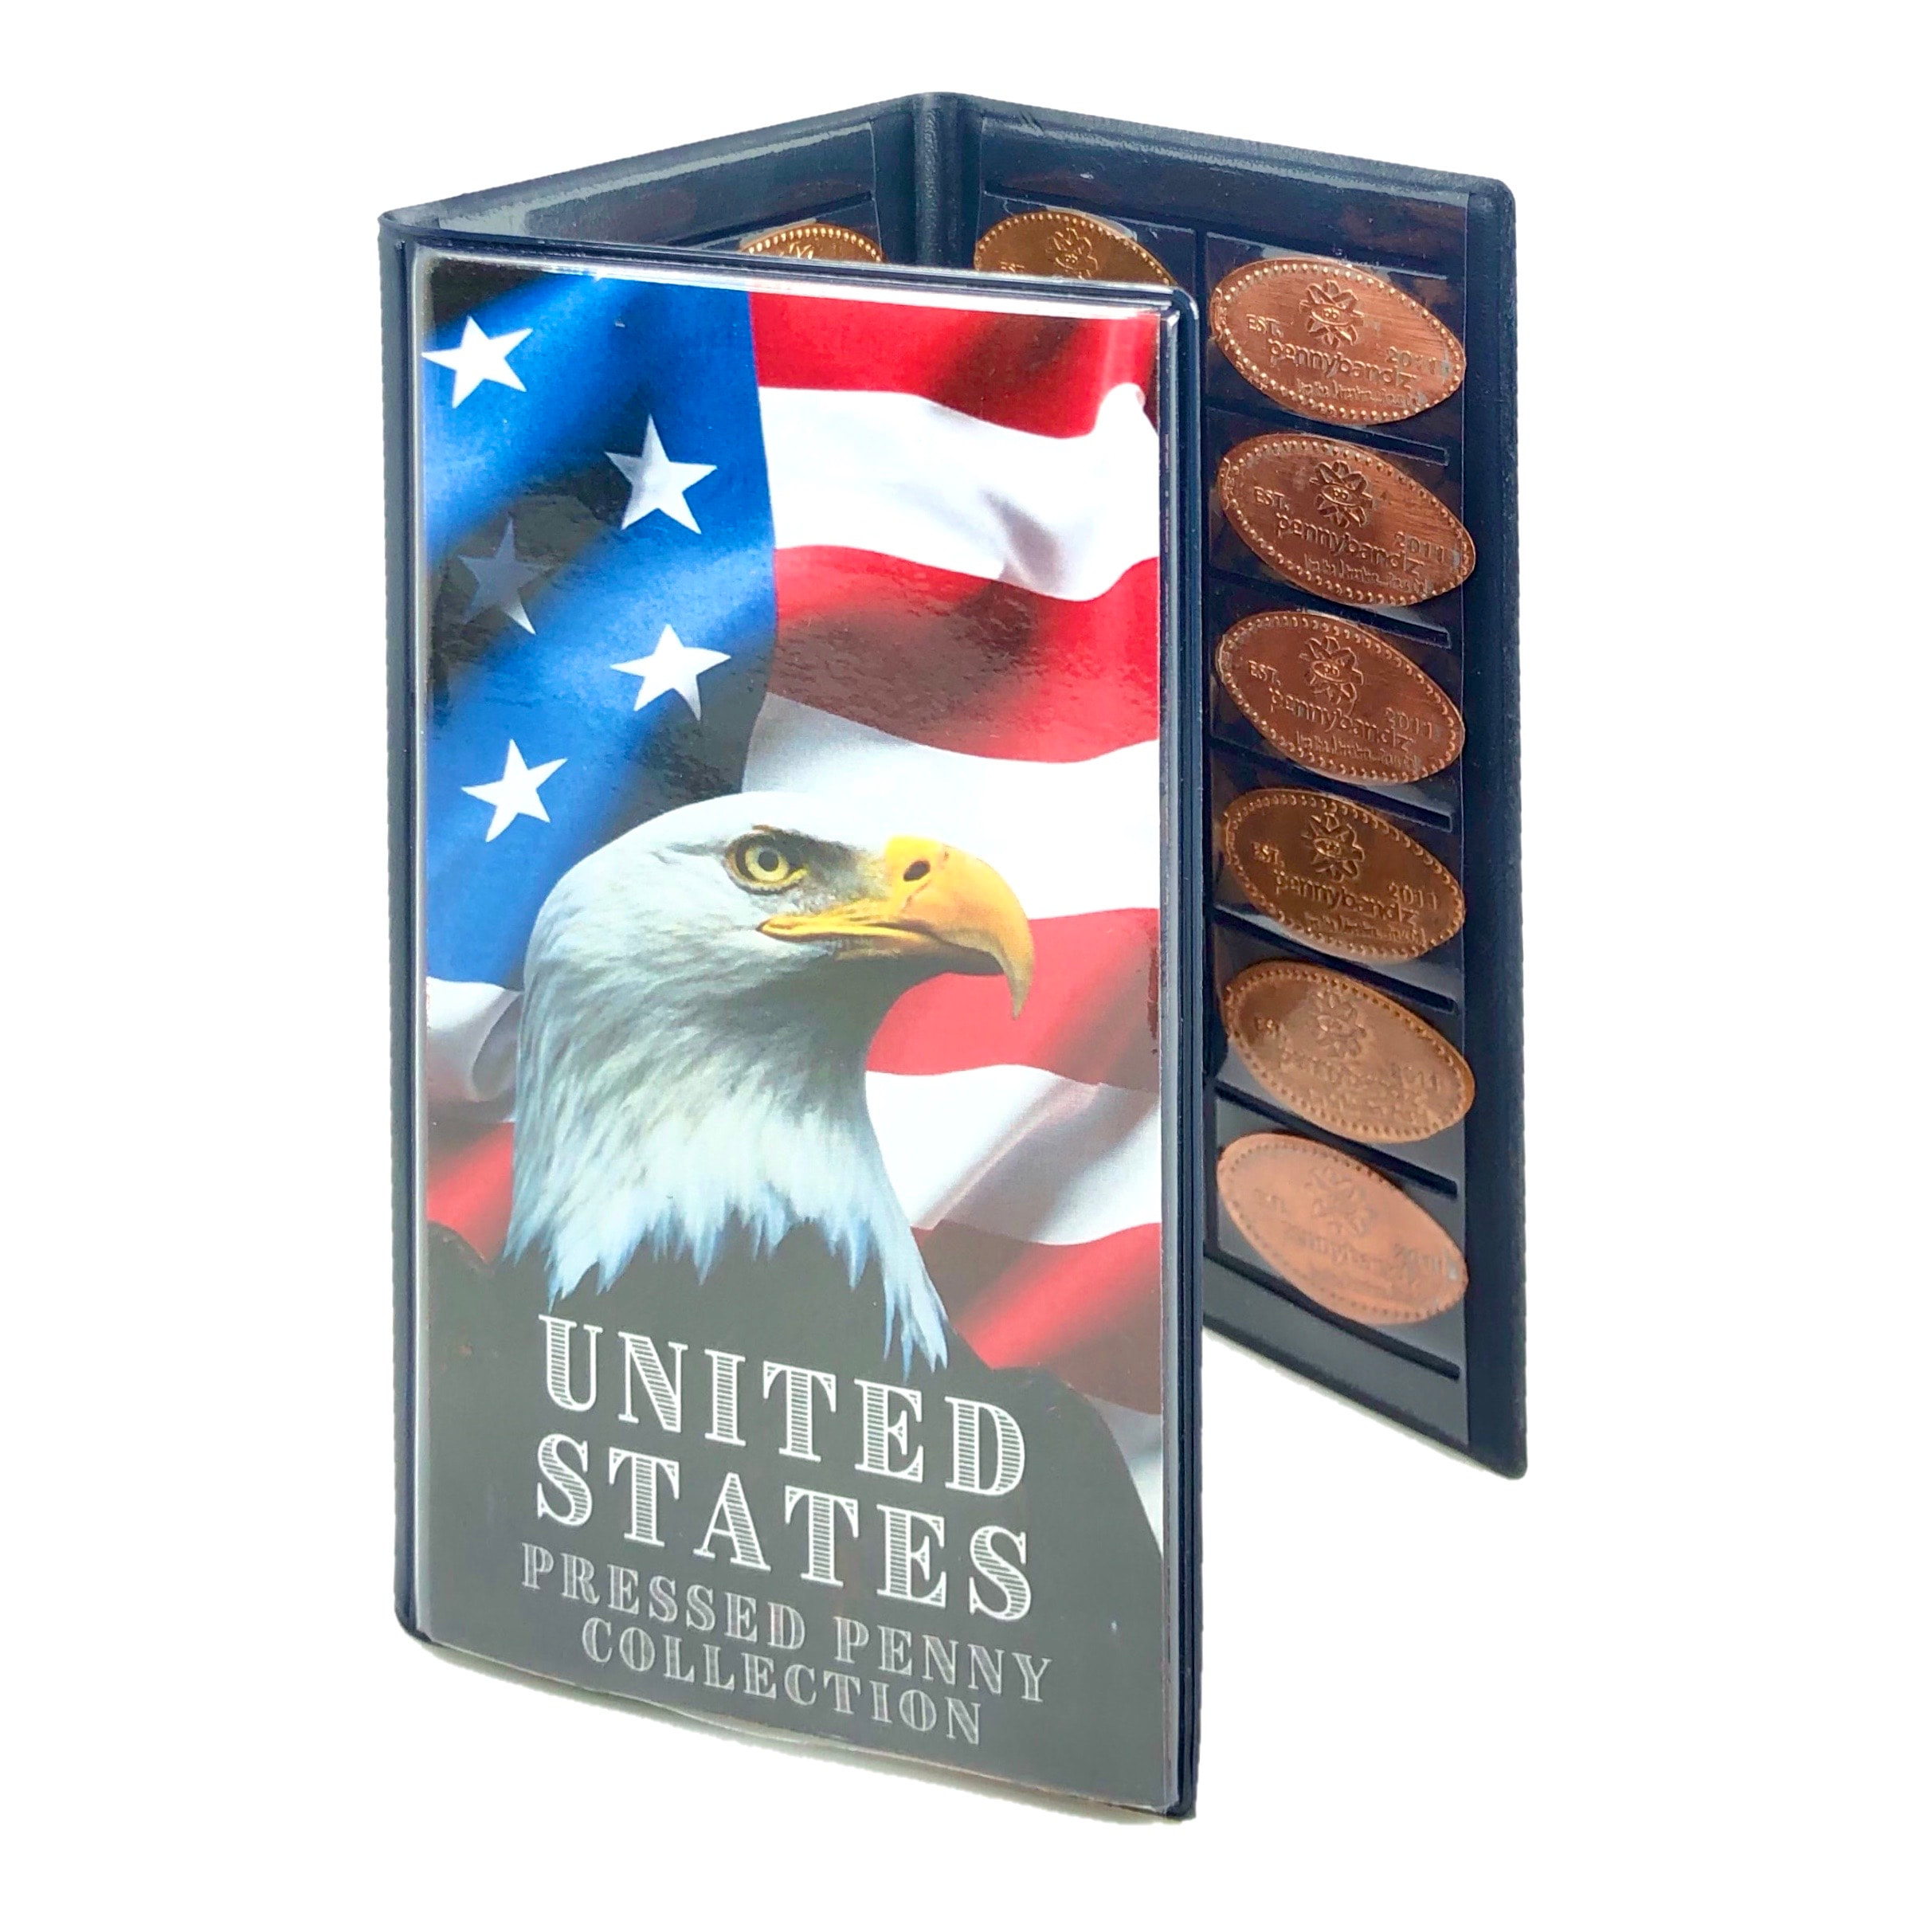 Pennybandz The Penny Journal Holds 146 Coins the Ultimate Souvenir Penny  Collecting Book for your Coin Collection Holds 128 Pressed Pennies and 18  Pressed Quarters or Nickels - Yahoo Shopping